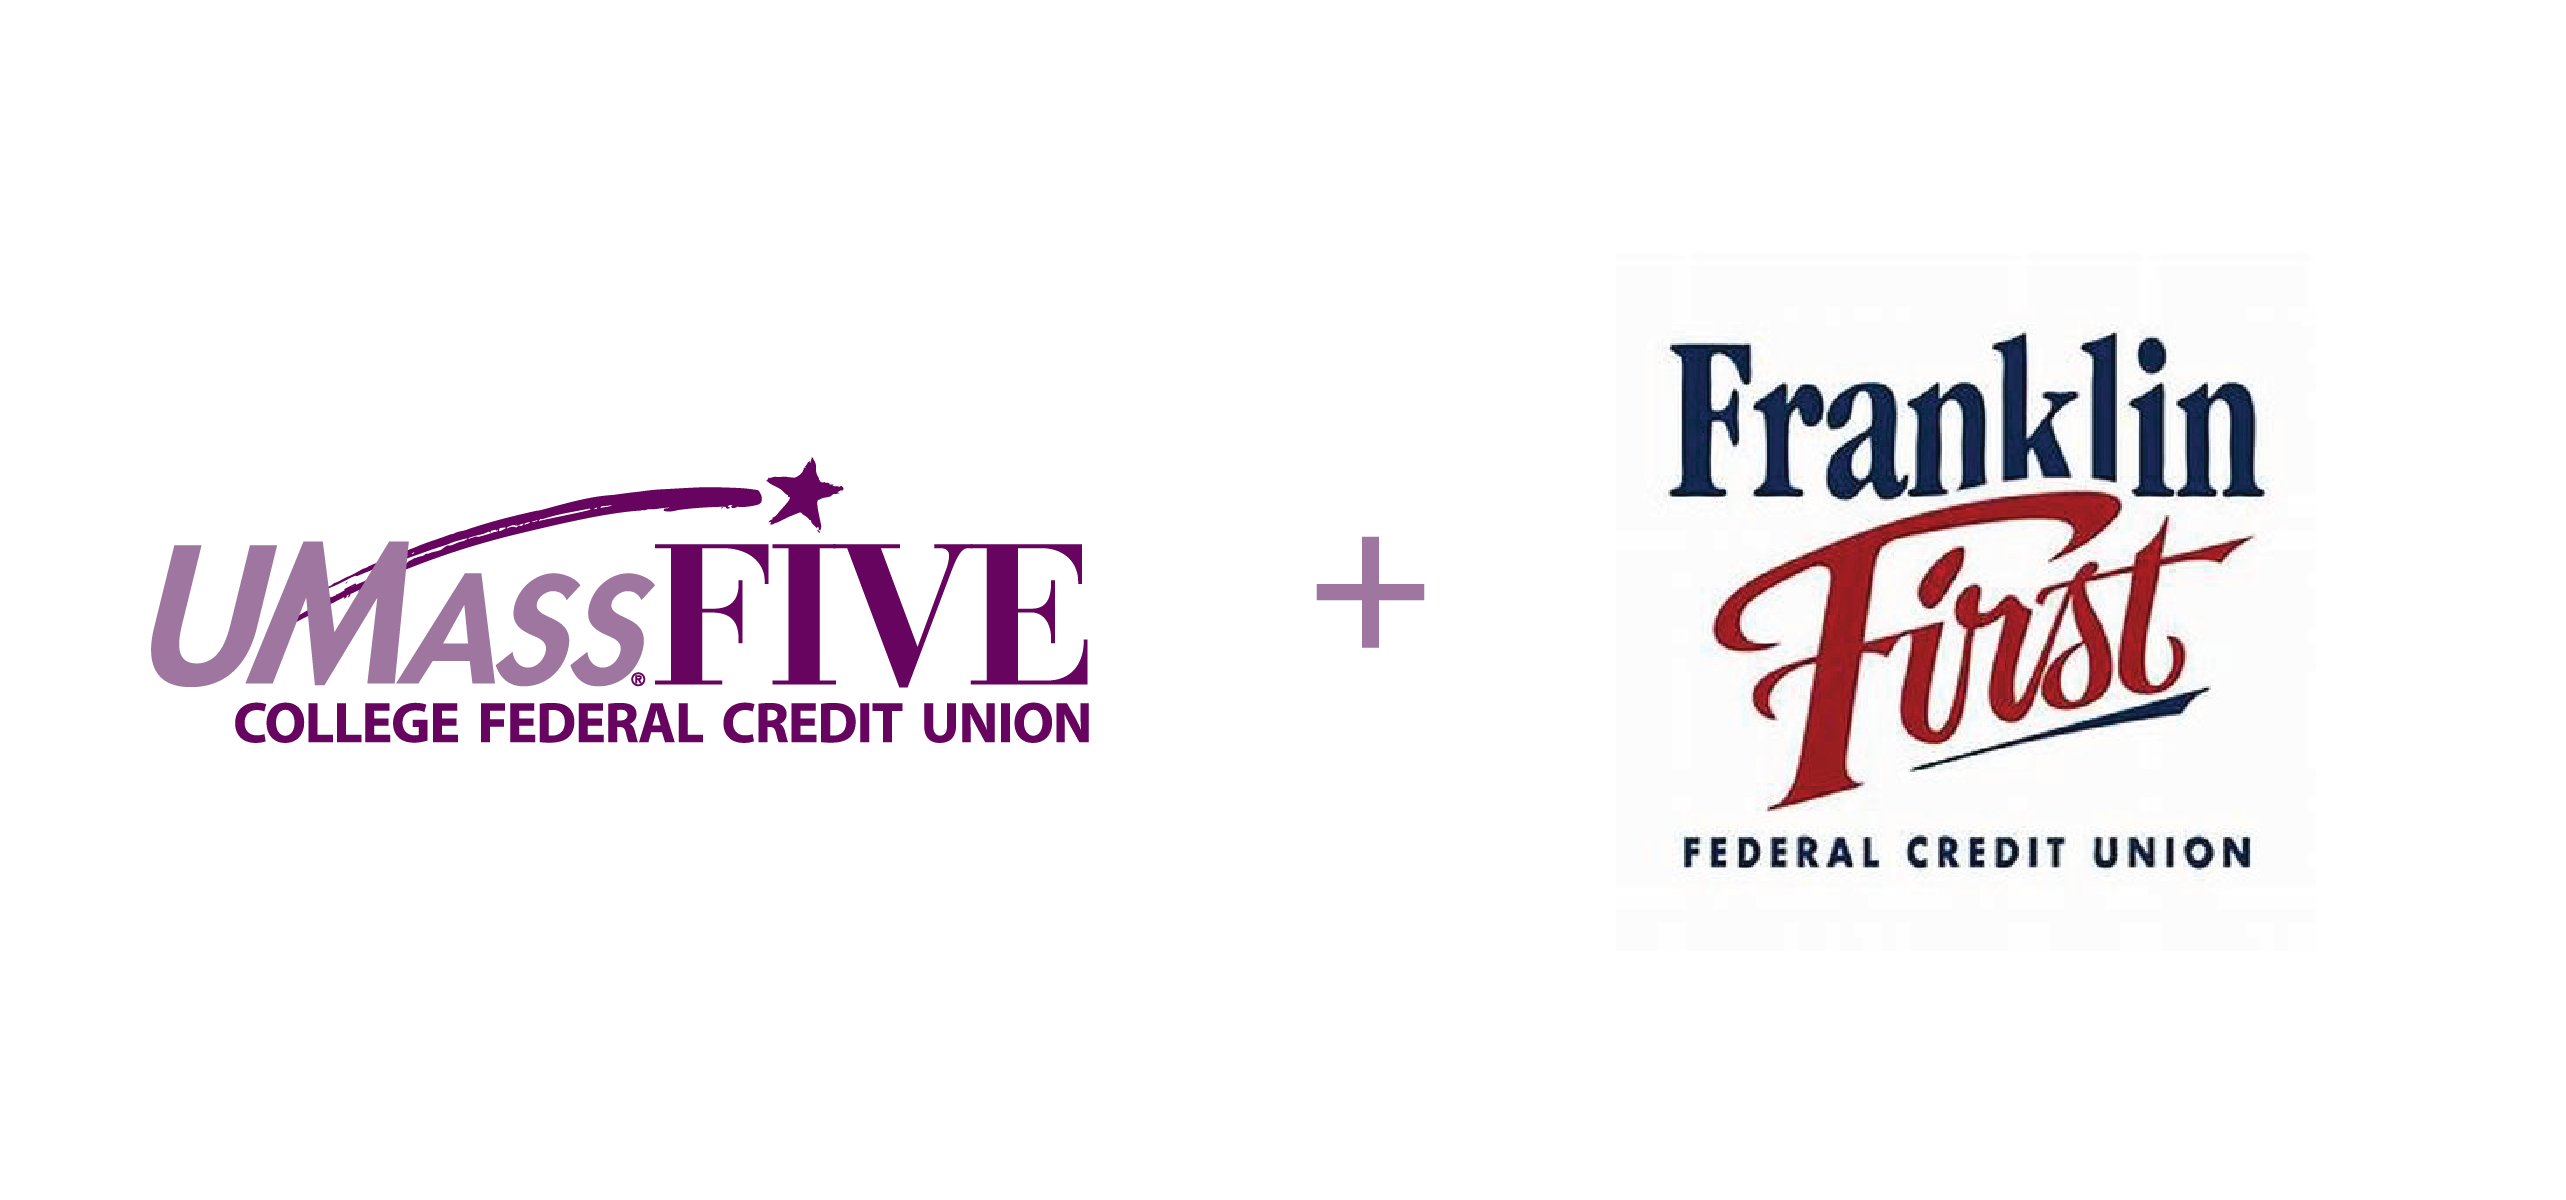 UMassFive and Franklin First Logo's